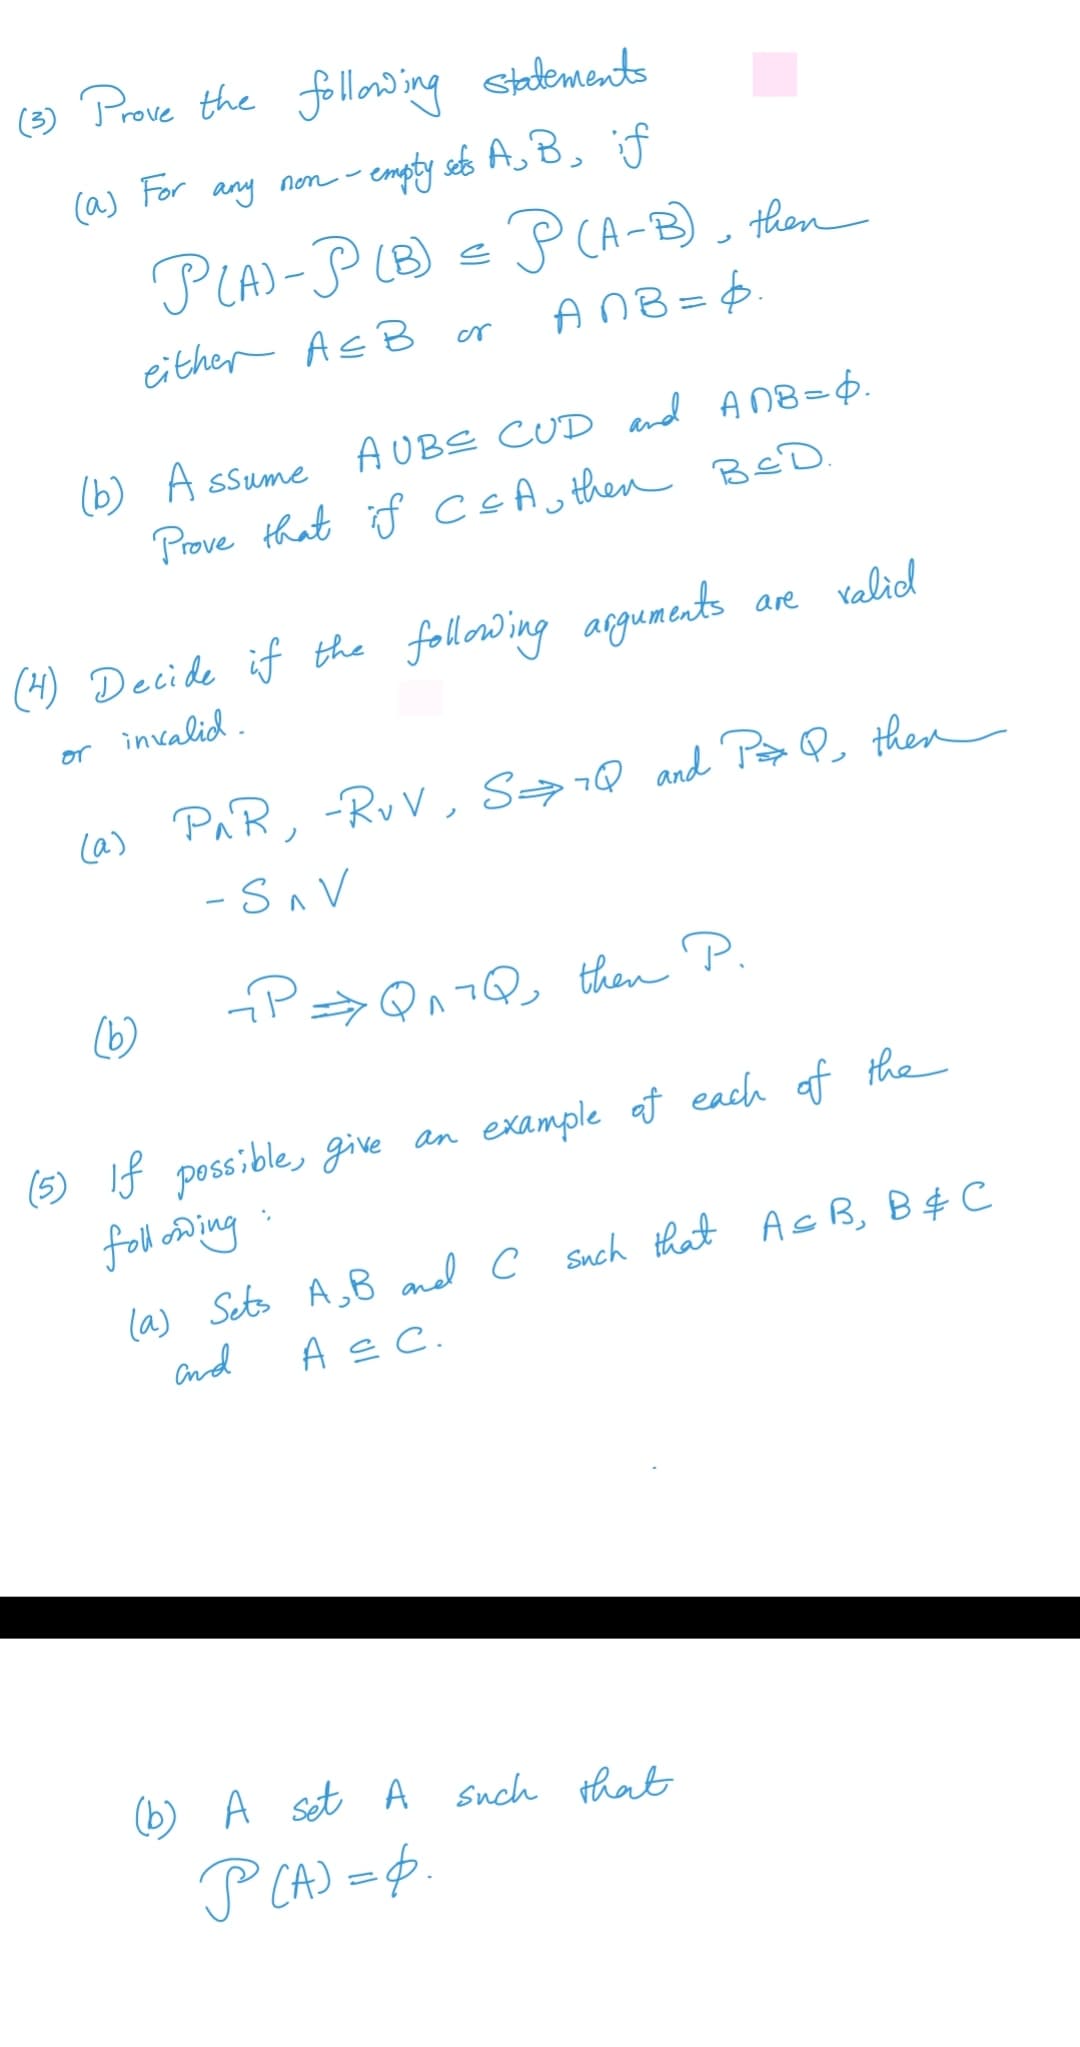 () stadements
Prove the follow ing
(a) For
any non - empty seb A,B, if
PLA)-P LB) = P CA-B), then
either Ac B
AnB = $.
or
(b) A ssume AUBE CUD and An8=6.
Prove that if ccAu then BeD.
(H) Decide if the following arguments
are valid
or invalid.
(a)
PAR, -RvV, S→7Q and Pa then
-SAV
(6)
then P.
(5) If possible, give an example at each af the
foll o ing
la) Sets A,B and c Such that AcB, B$ C
and
A s C.
(b) A set A Snch that
P CA) =$.
